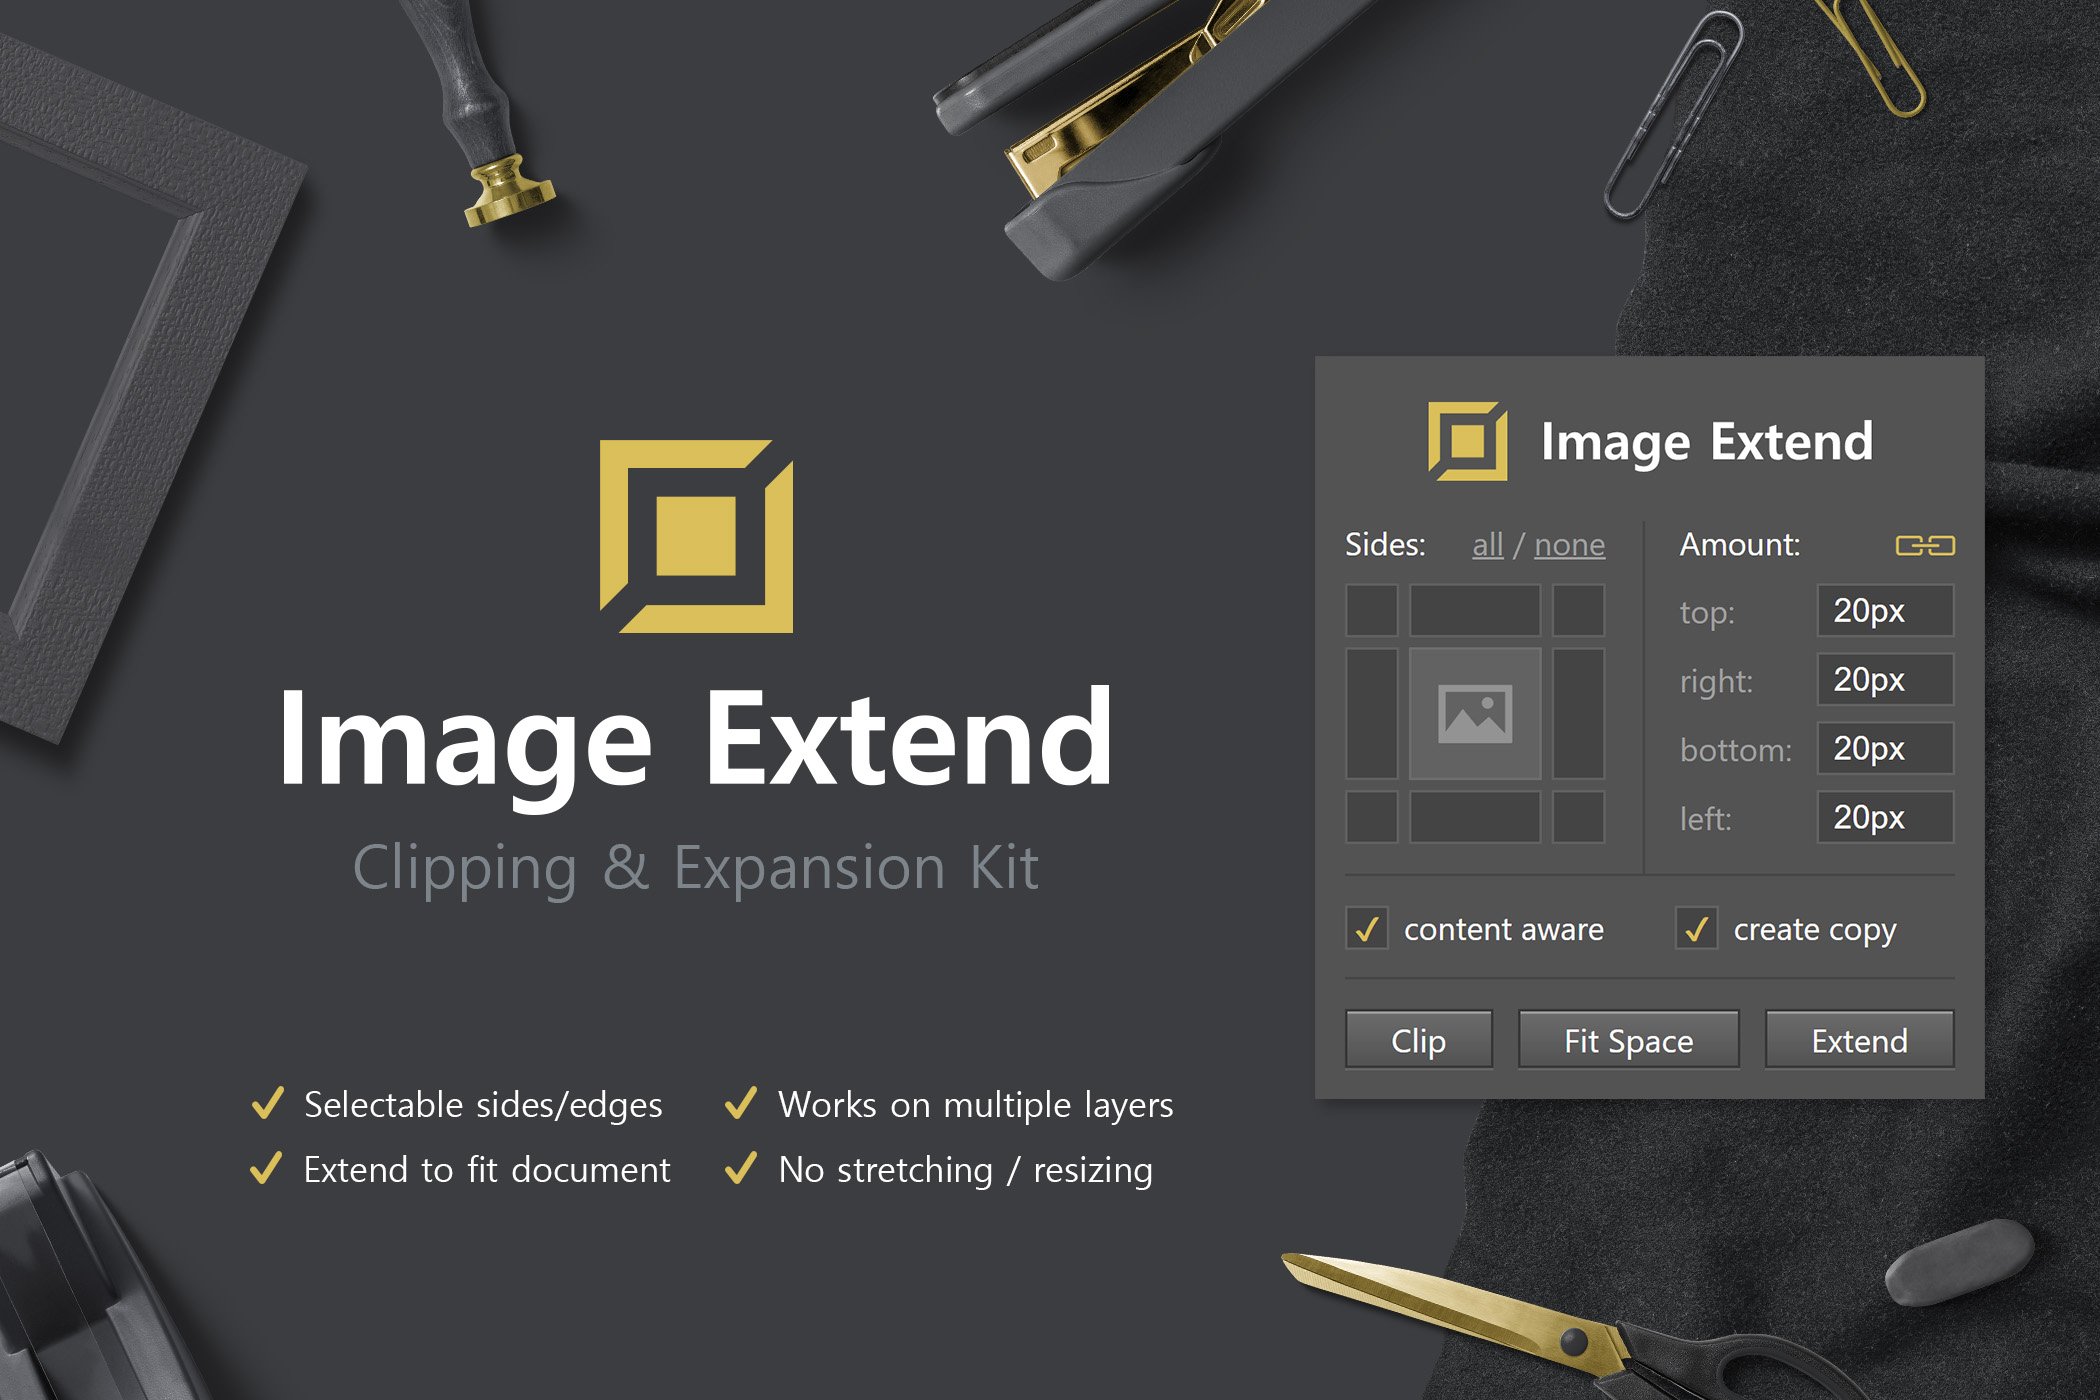 Image Extend - Clip & Expand Kitcover image.